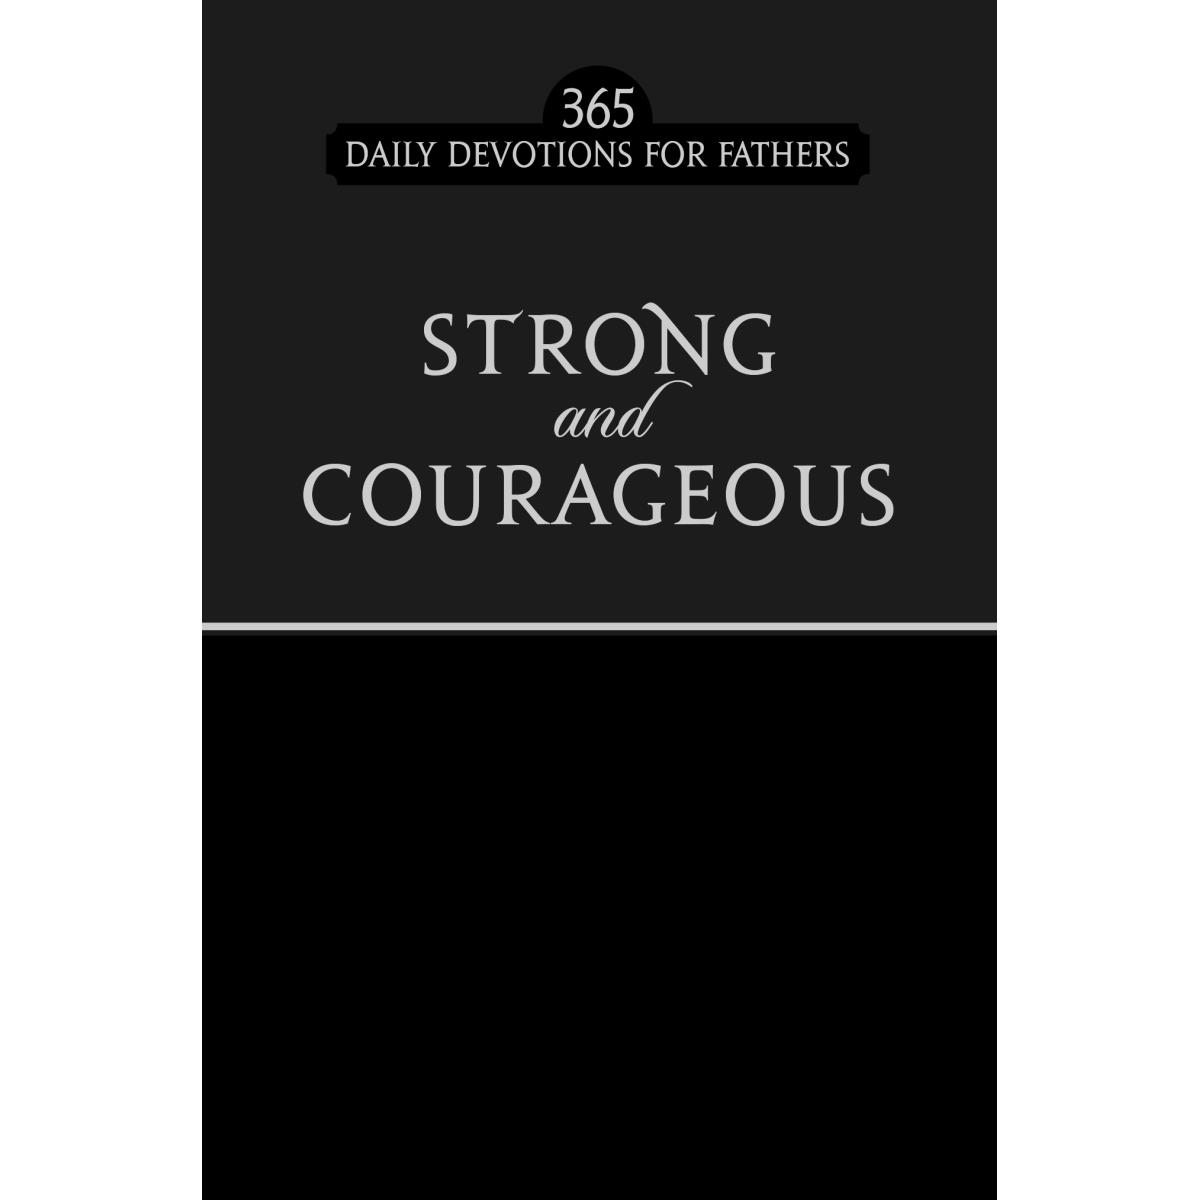 136541 Strong & Courageous - Black Imitation Leather